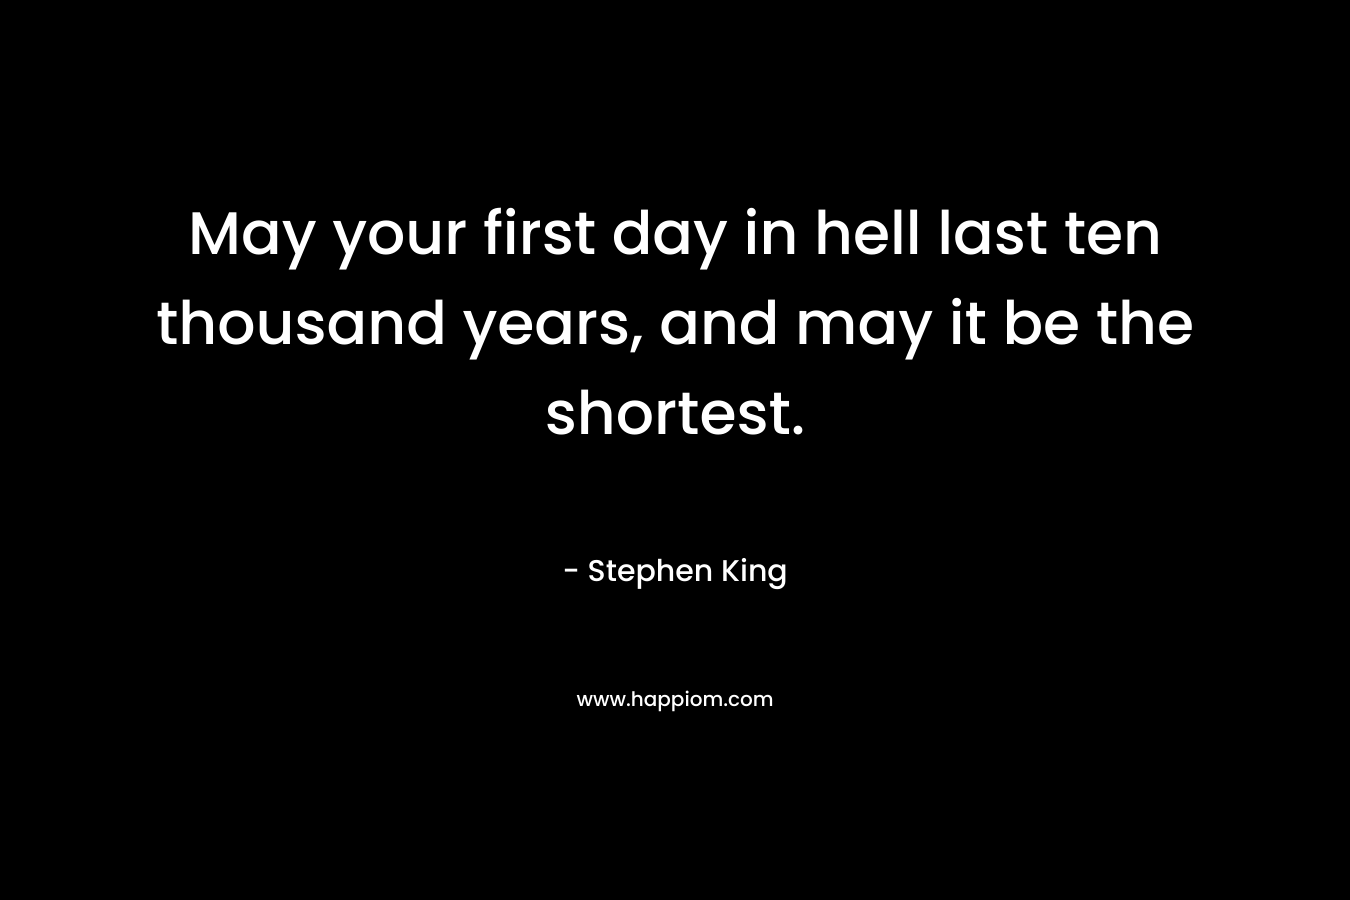 May your first day in hell last ten thousand years, and may it be the shortest.